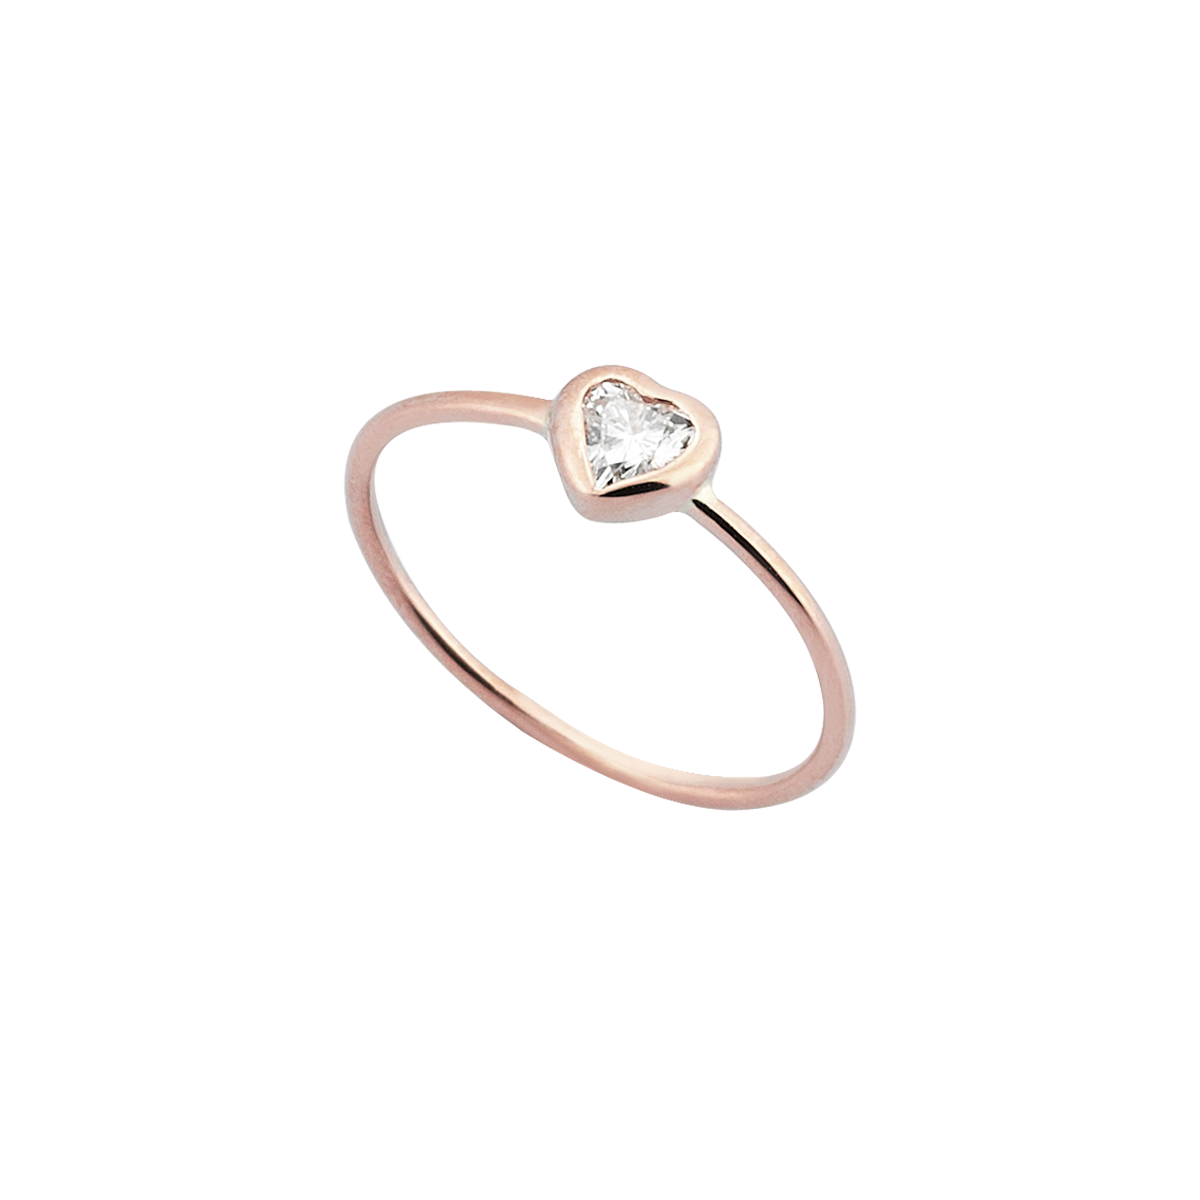 Heart Diamond Midi Ring in Rose Gold - Her Story Shop